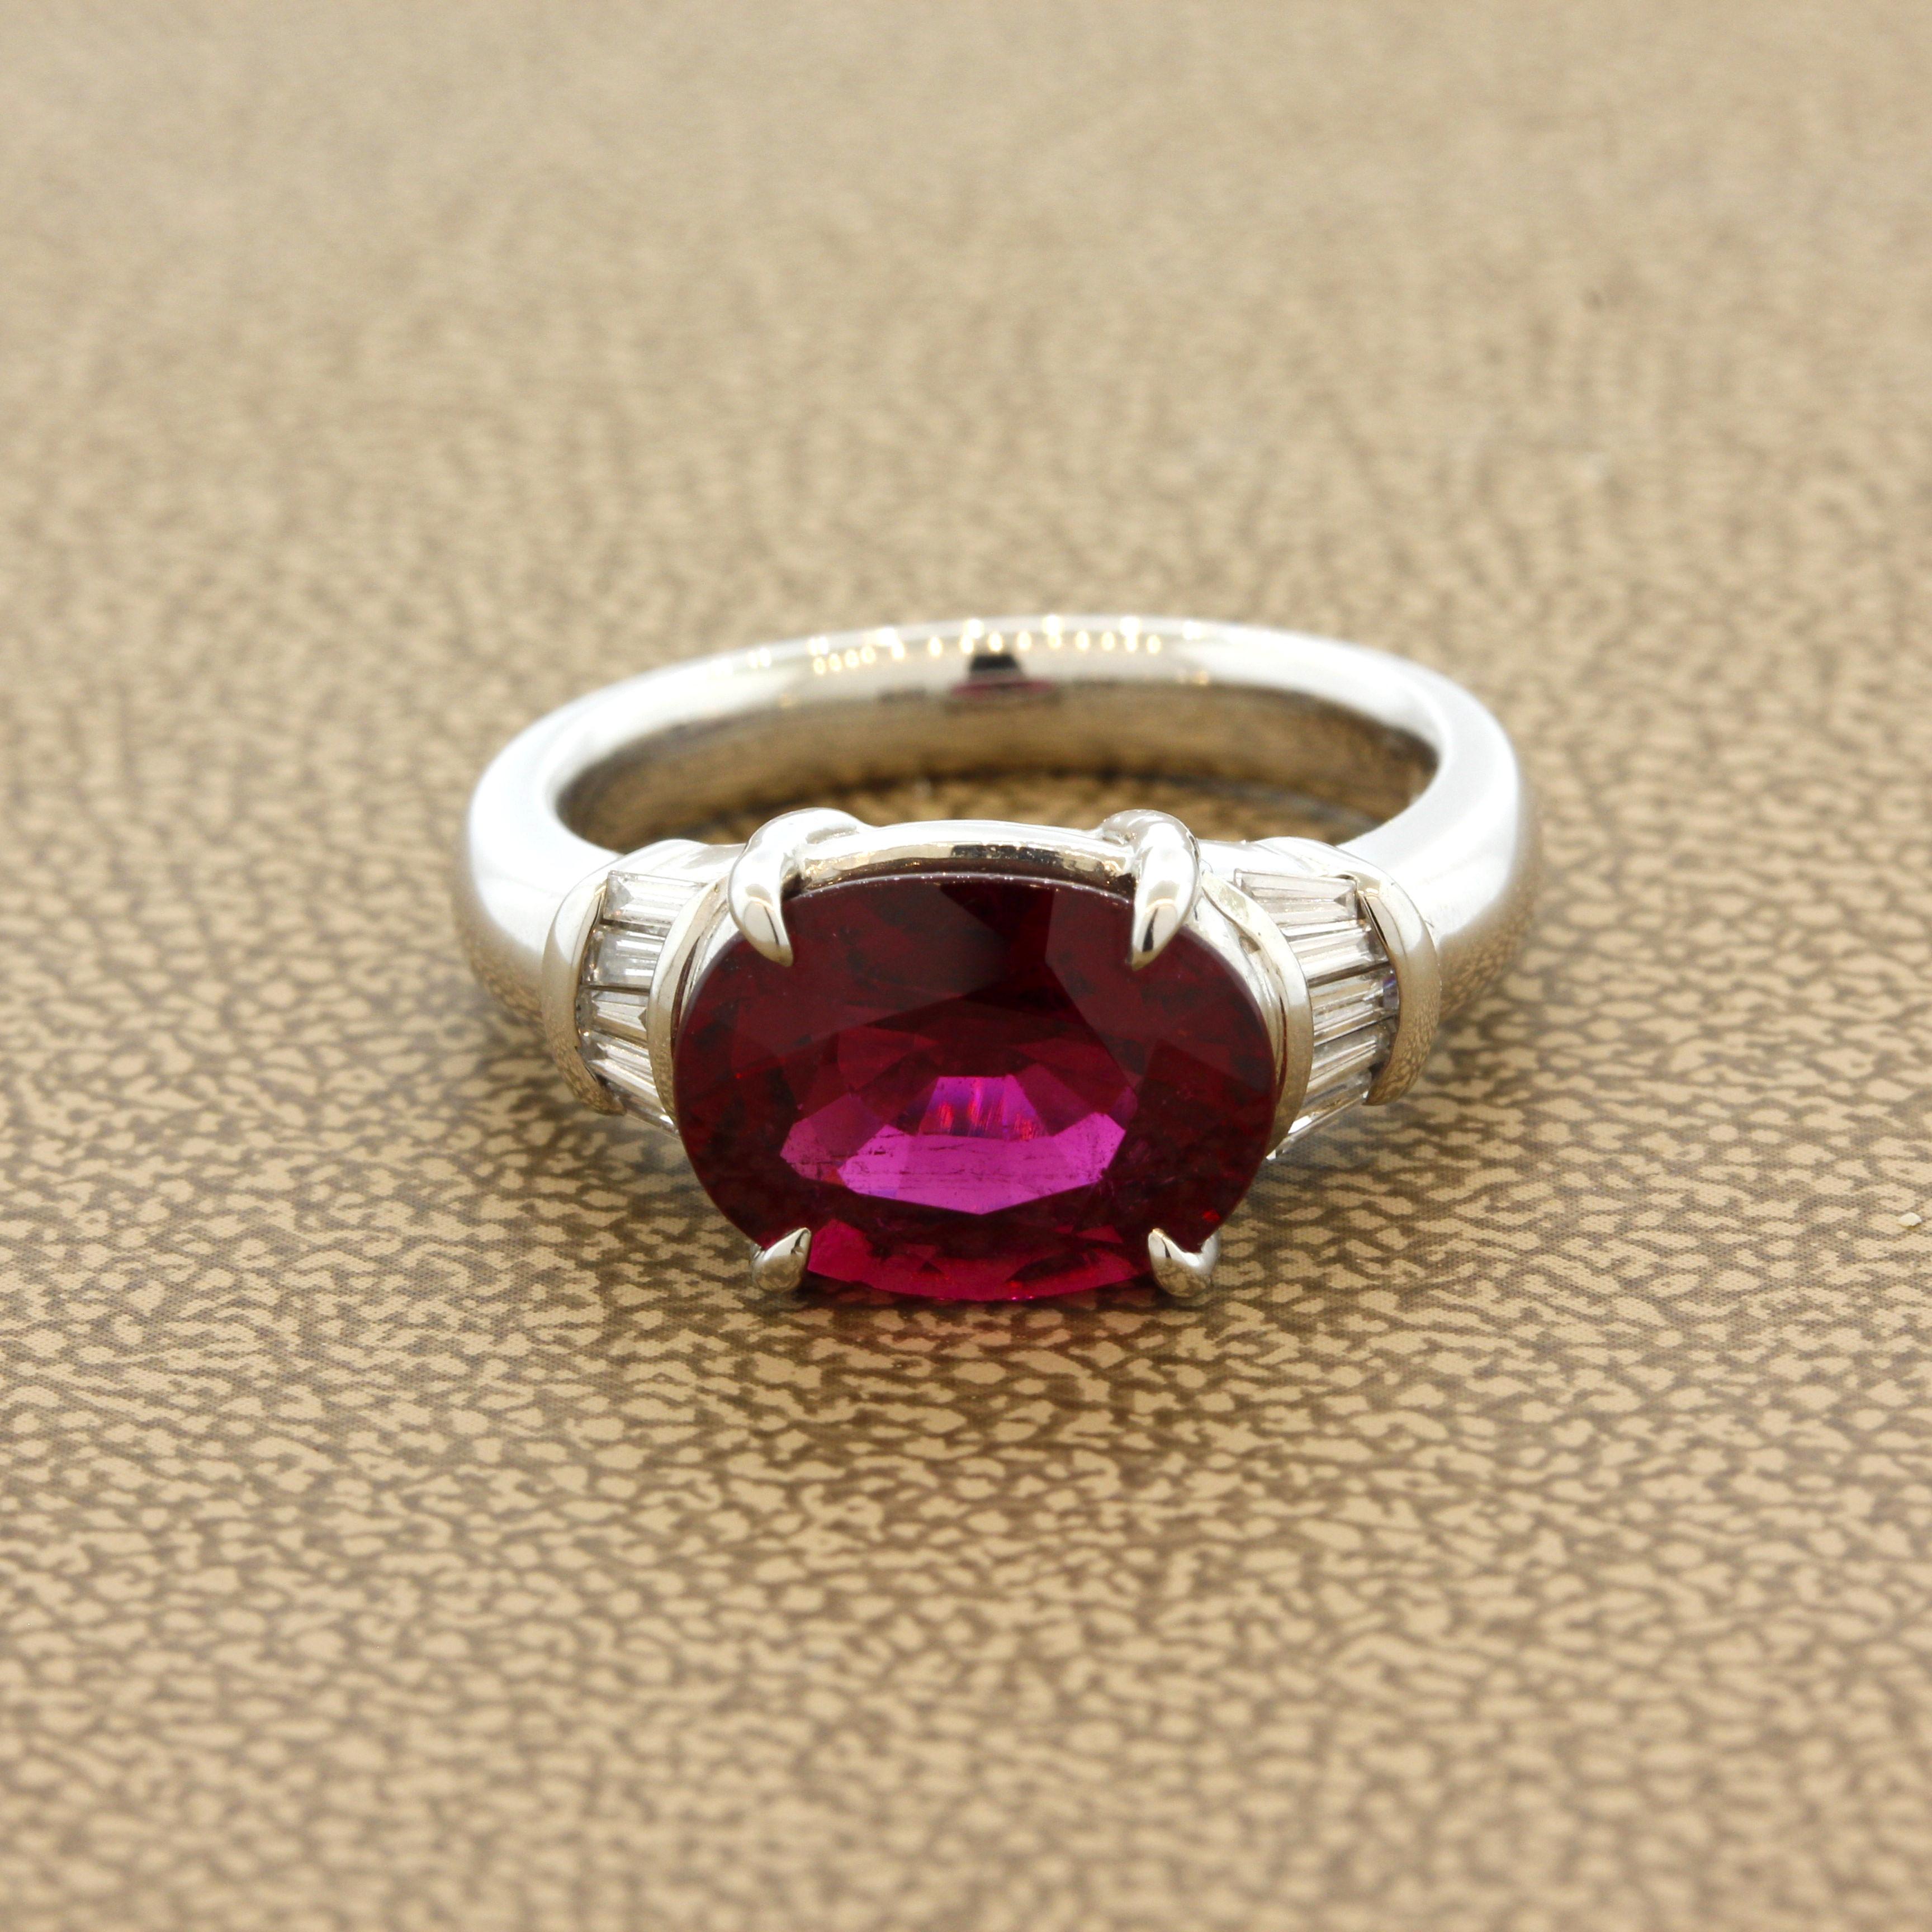 A superb rubelite tourmaline with a vivid red color that will rival any other stone on the market. It weighs 3.58 carats and also has fantastic clarity along with its intense vivid color. It is complemented by 0.15 carats of baguette-cut diamonds